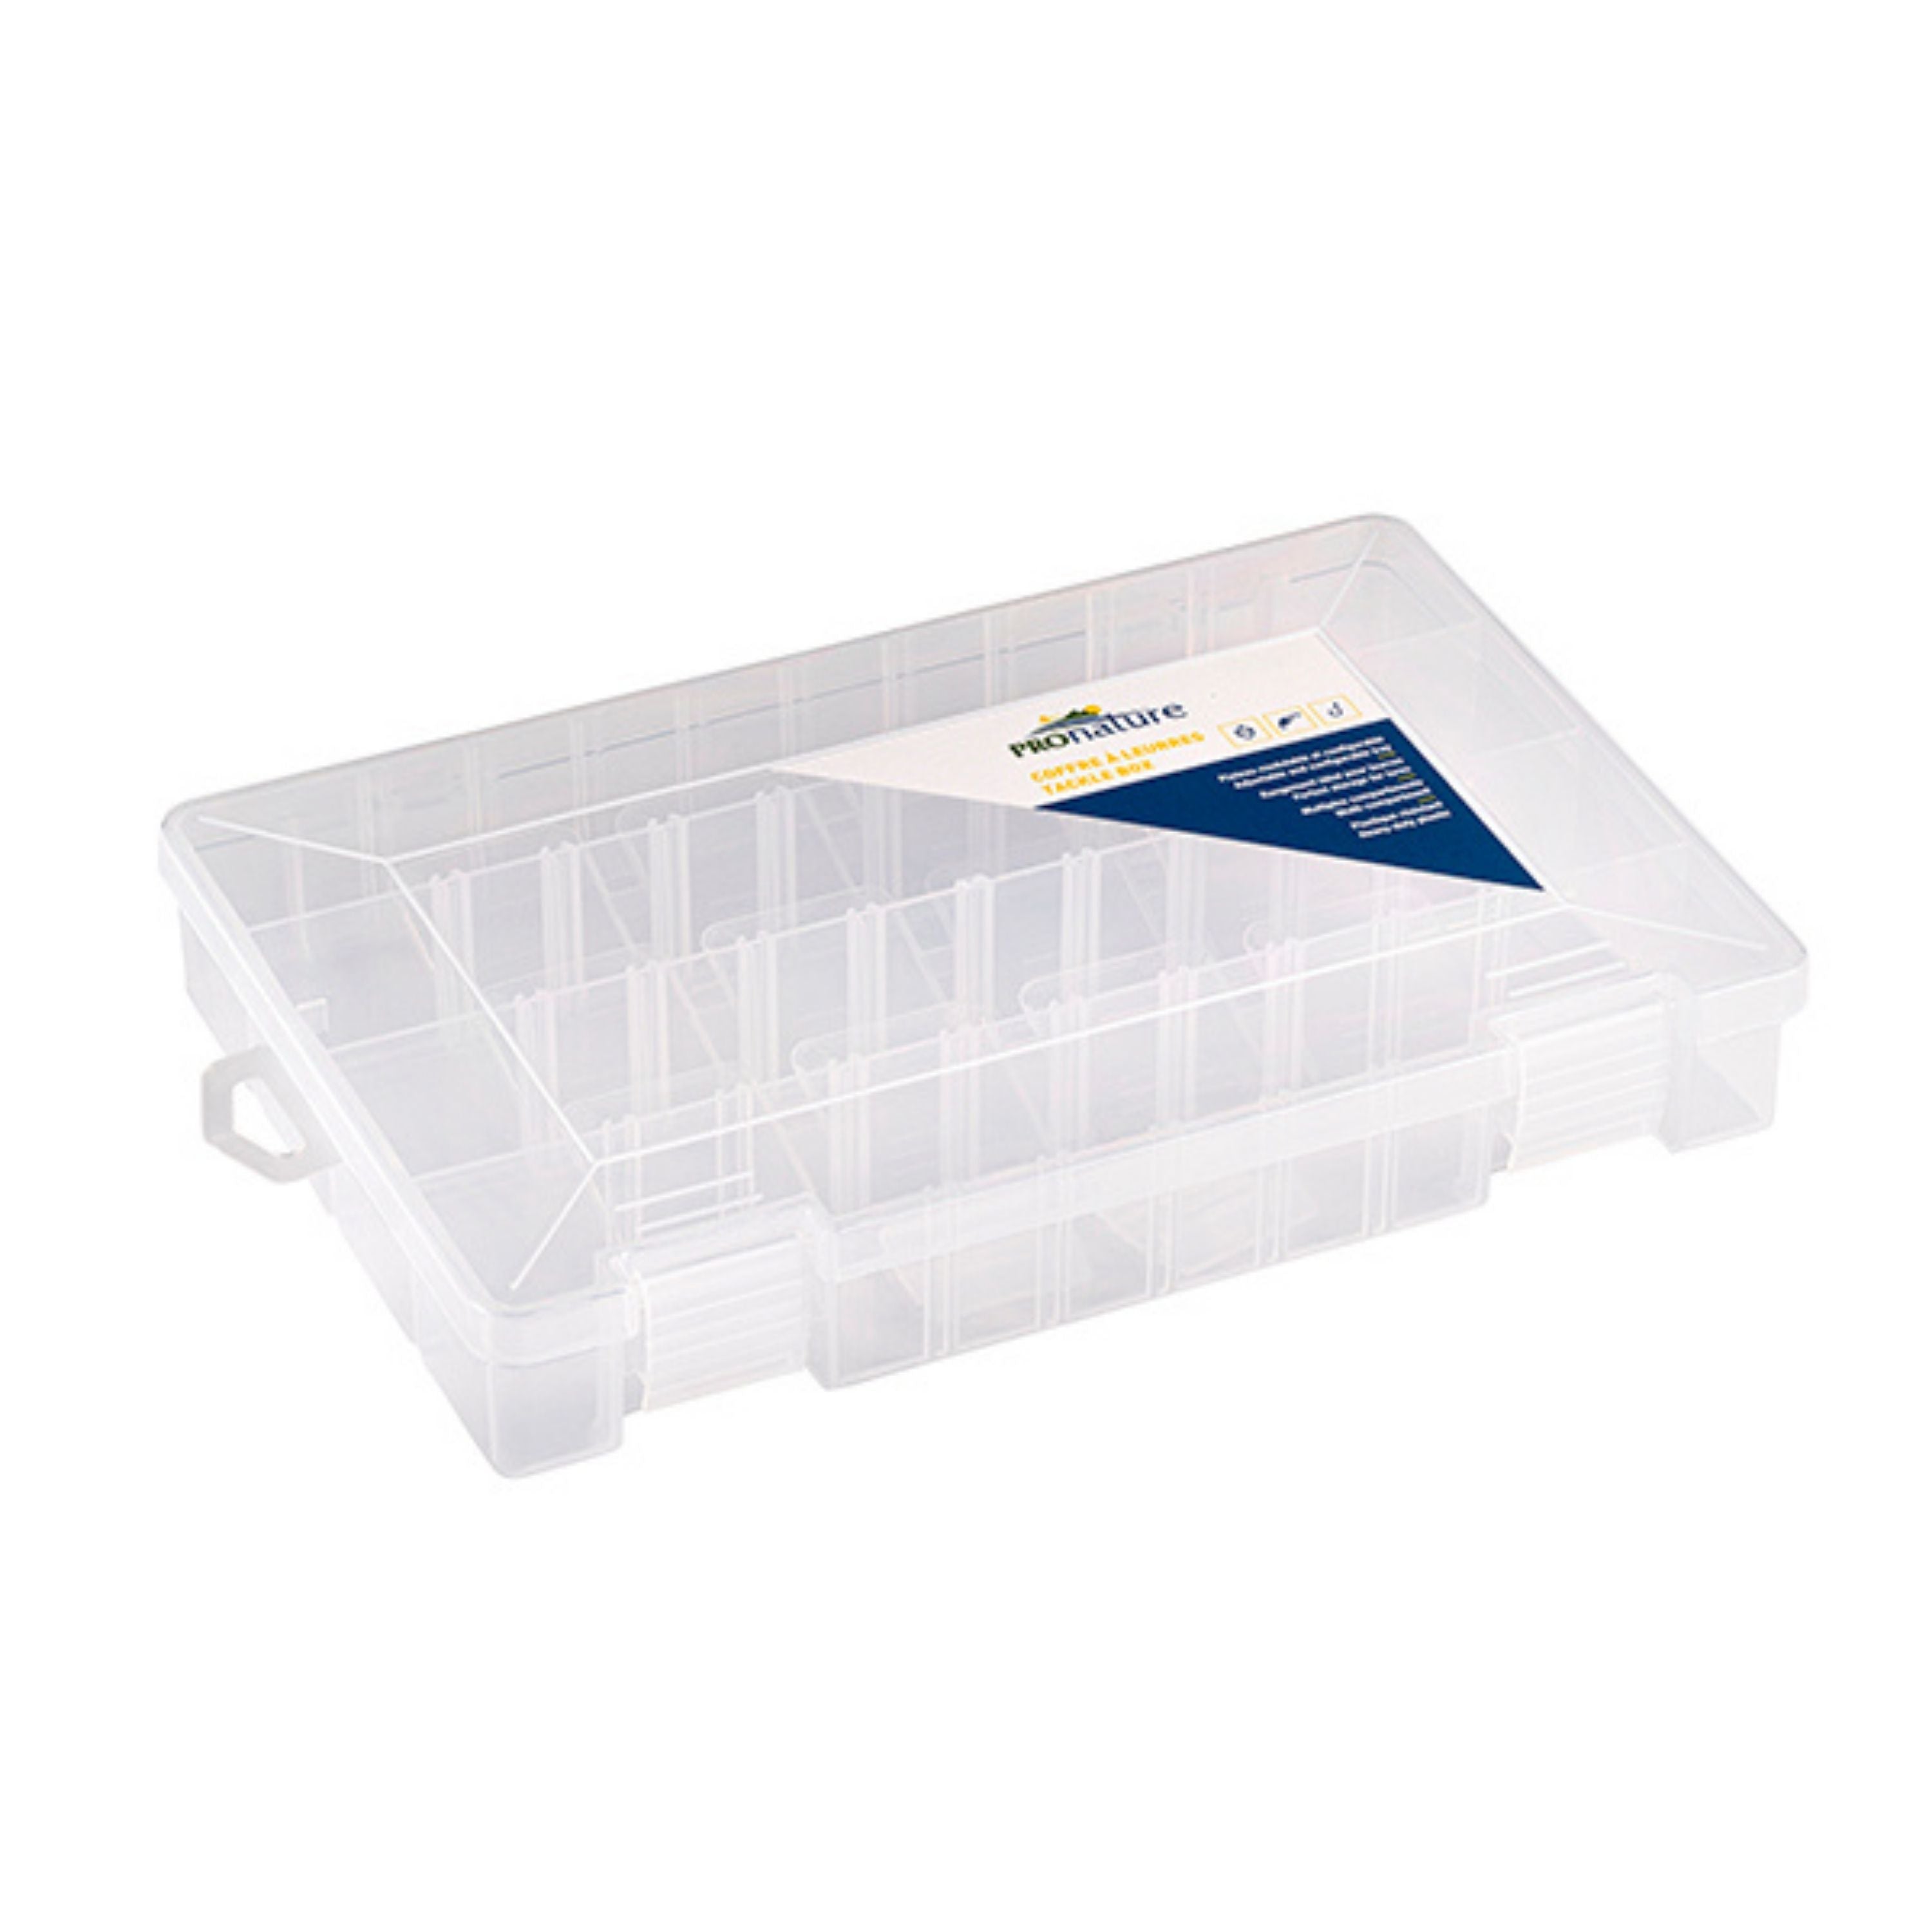 Small format tackle boxes — Groupe Pronature